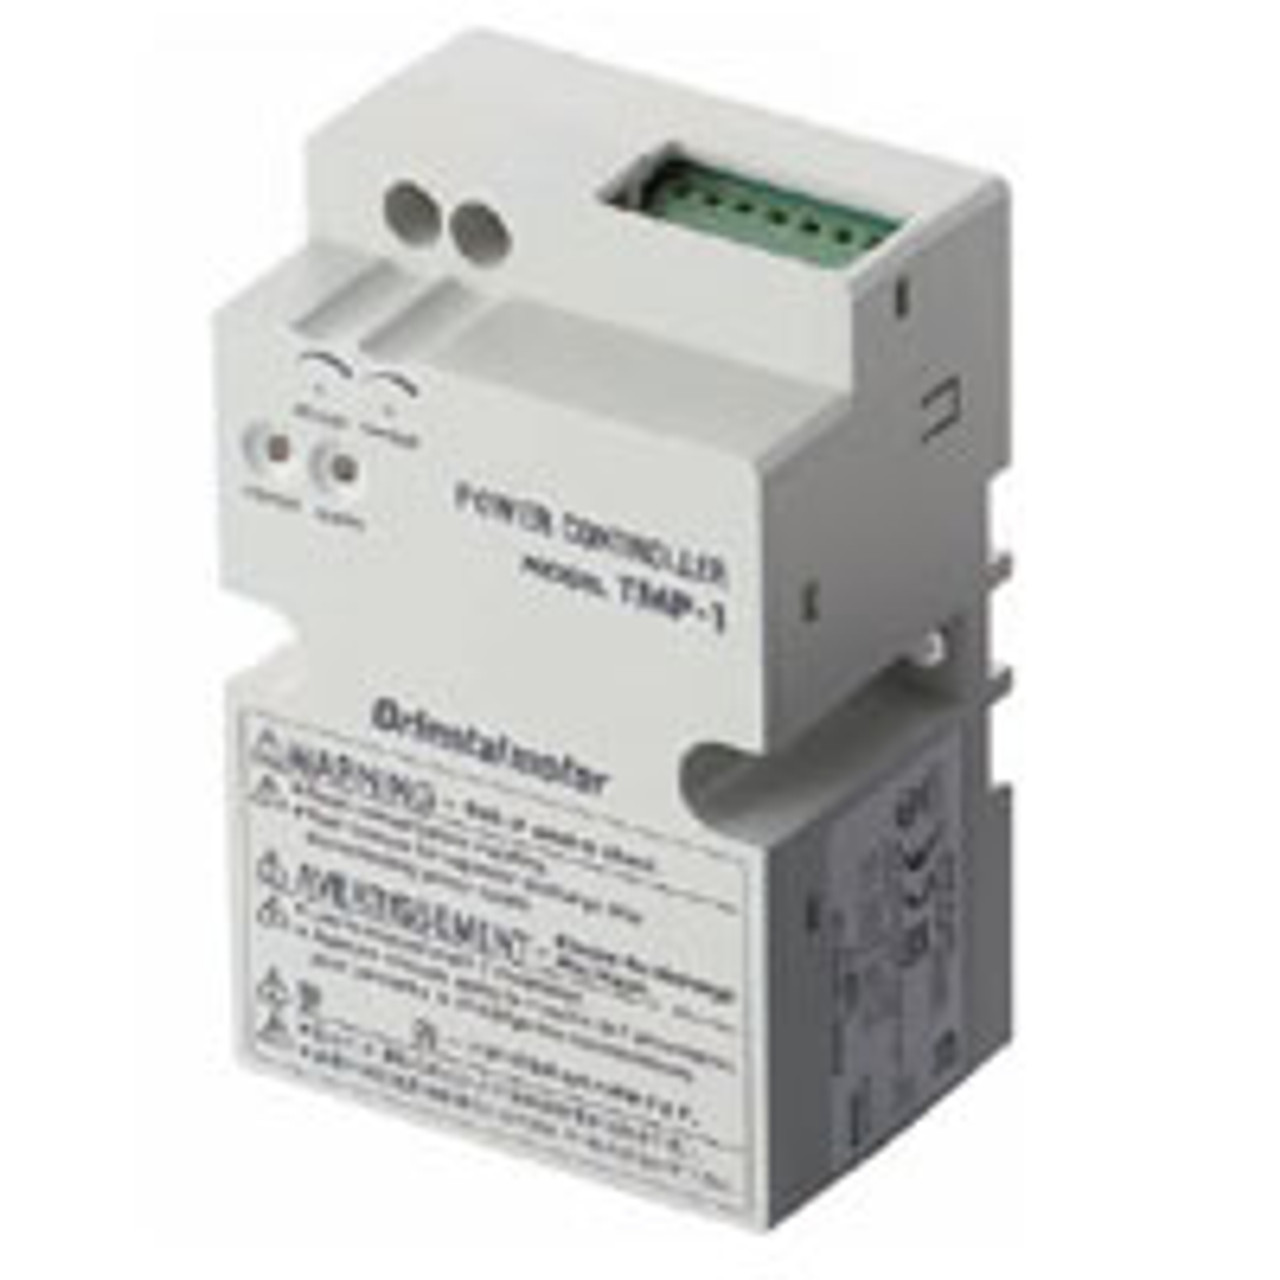 TMP-1 - Product Image